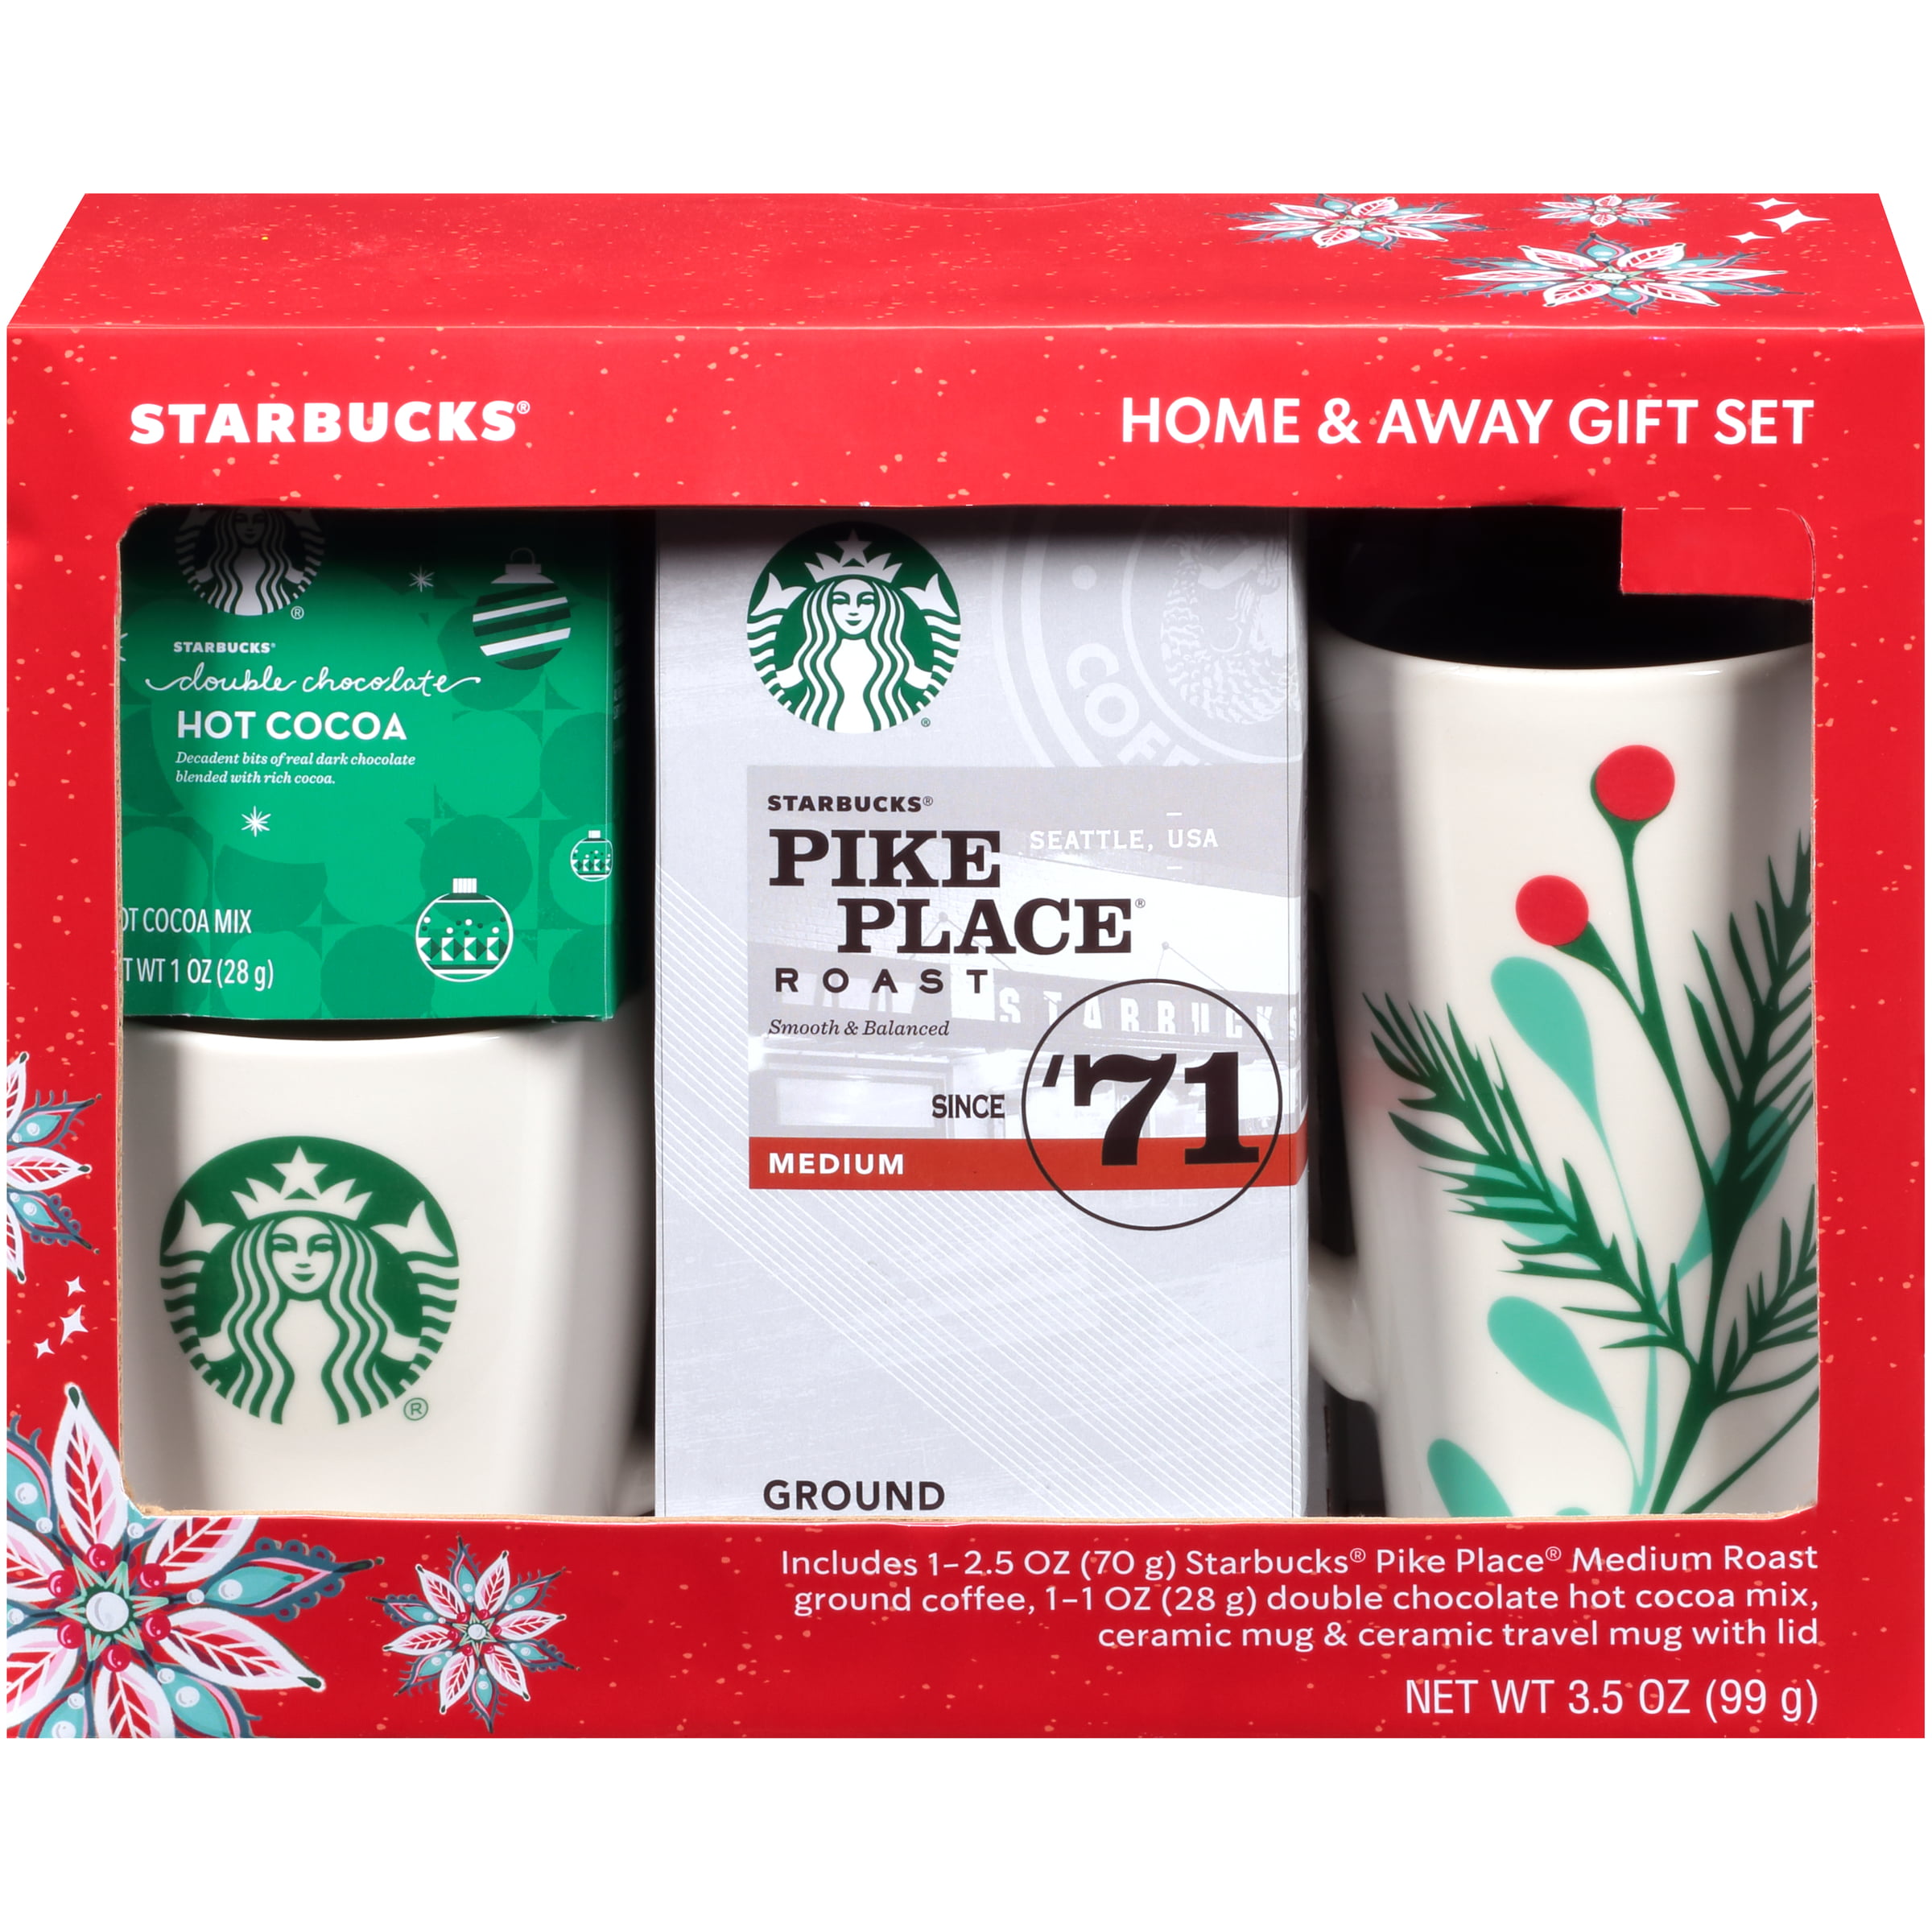 Coffee and Cocoa For You Gift Set - Assorted by Starbucks at Fleet Farm